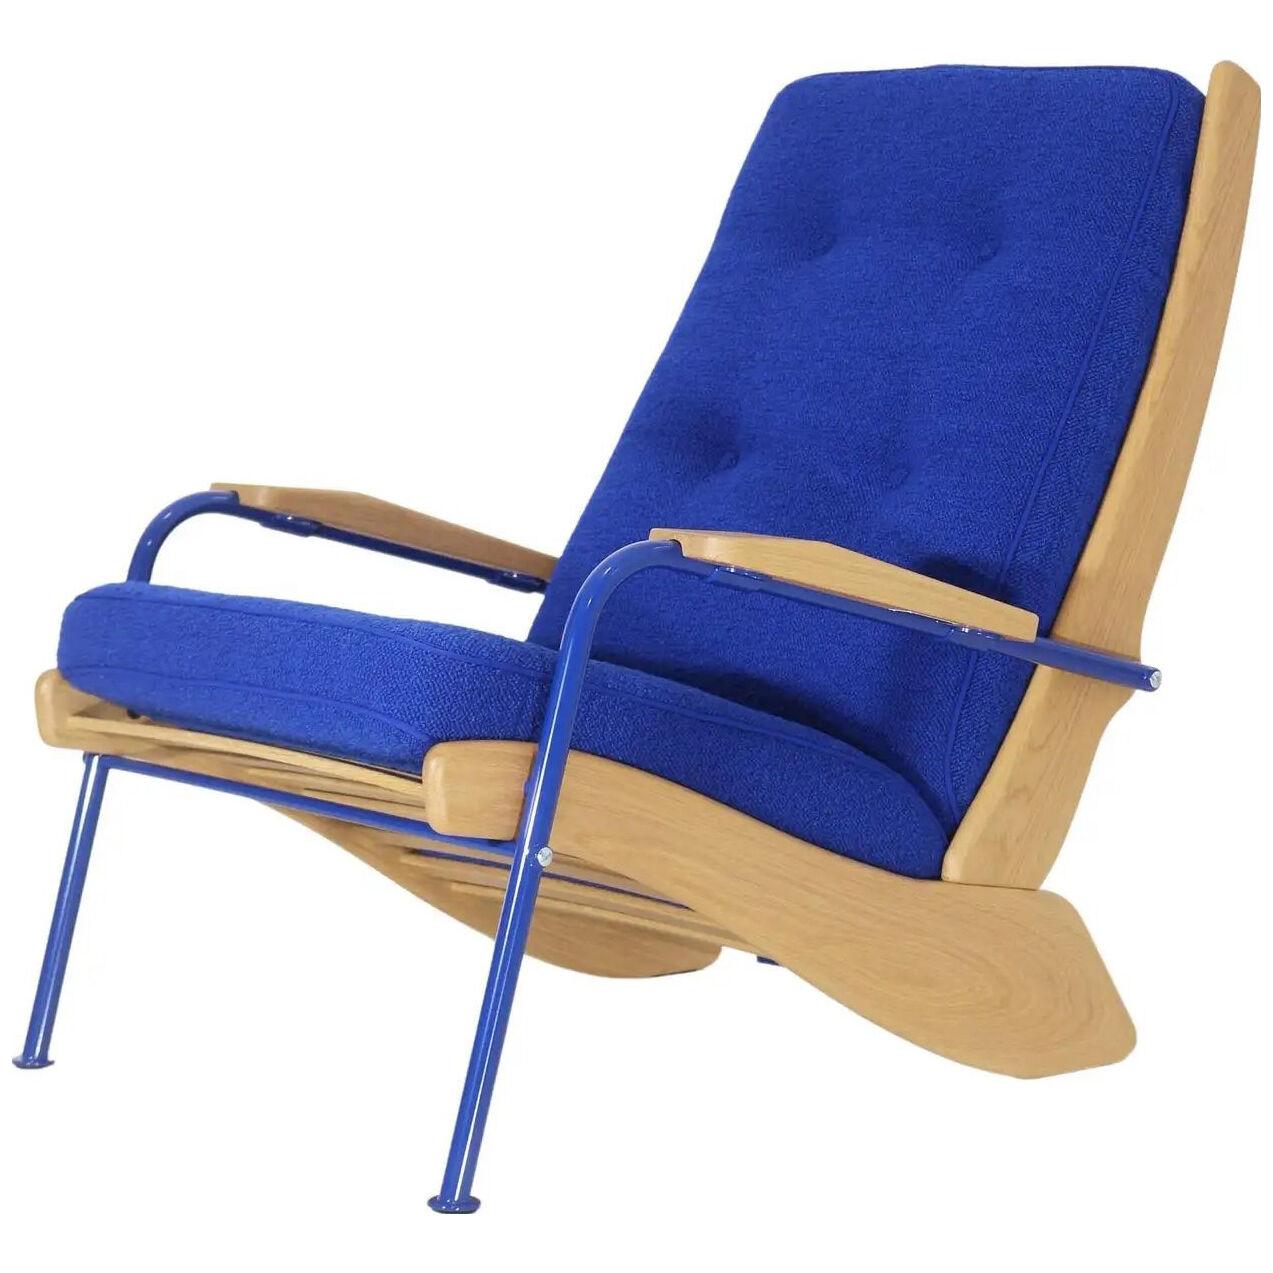 Jean Prouvé, Fauteuil Kangourou Edited by Vitra, Contemporary Limited Edition